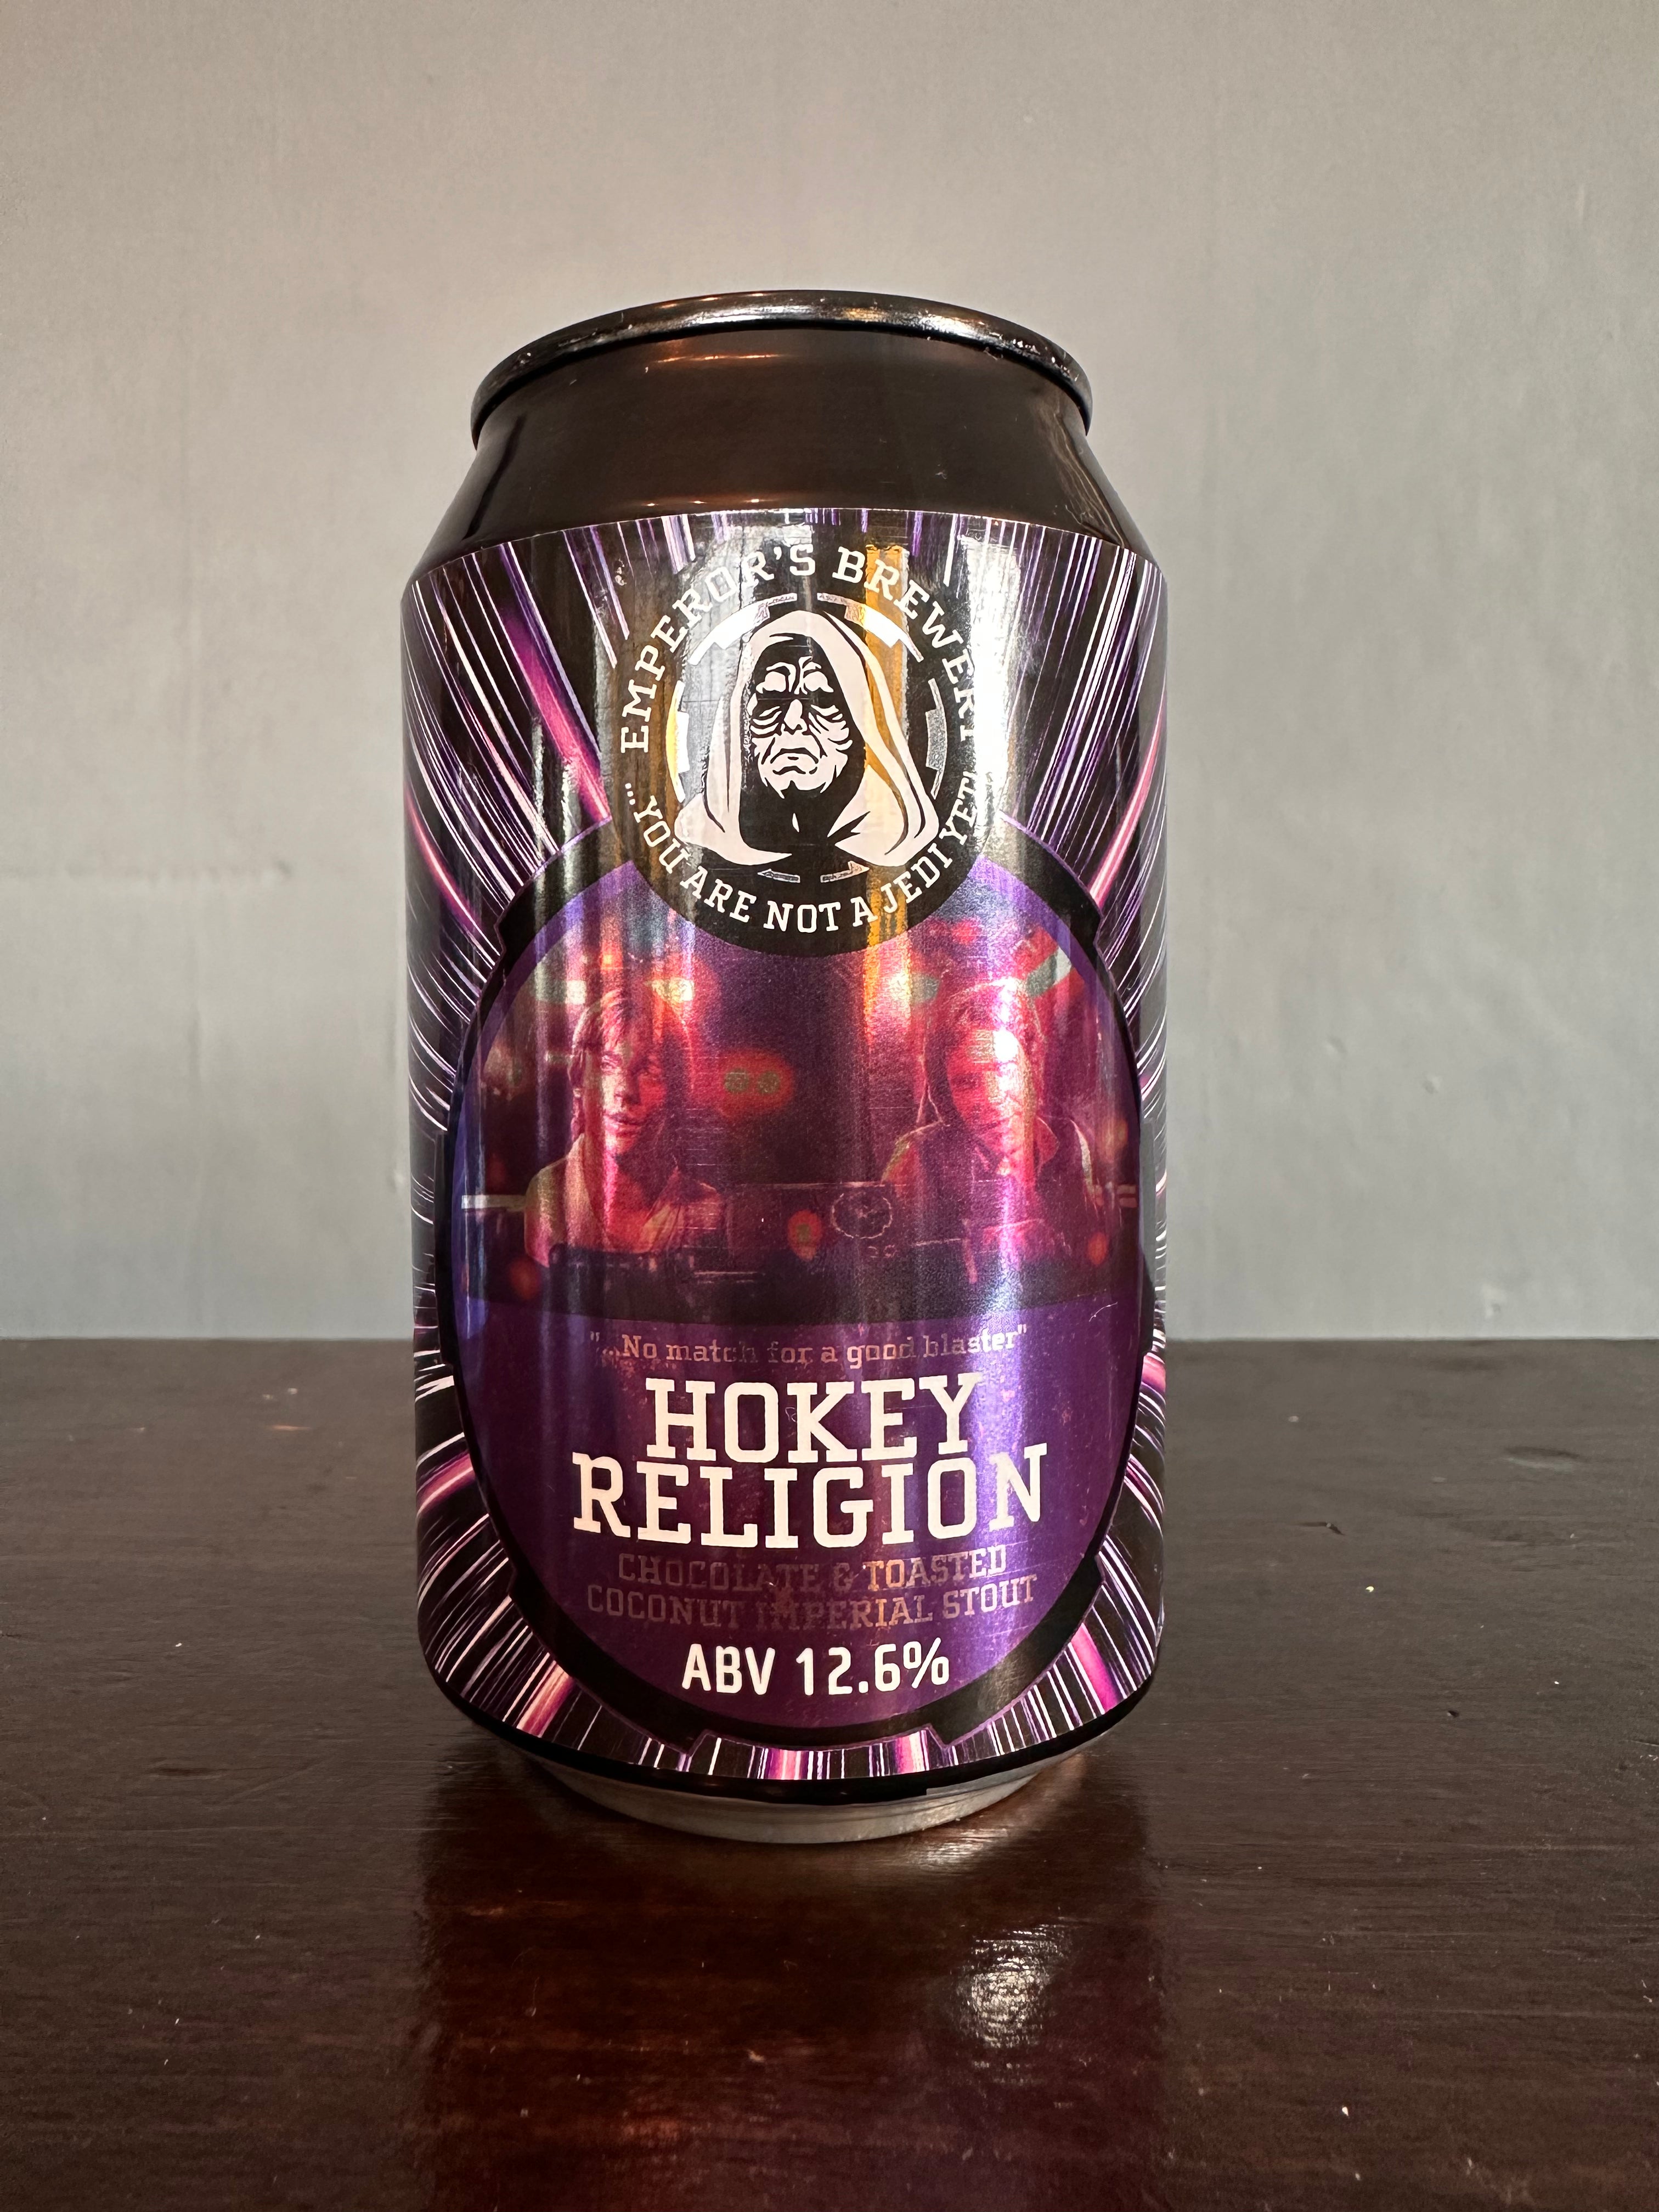 Emperor’s Hokey Religion Chocolate & Toasted Coconut Imperial Stout 12.6%